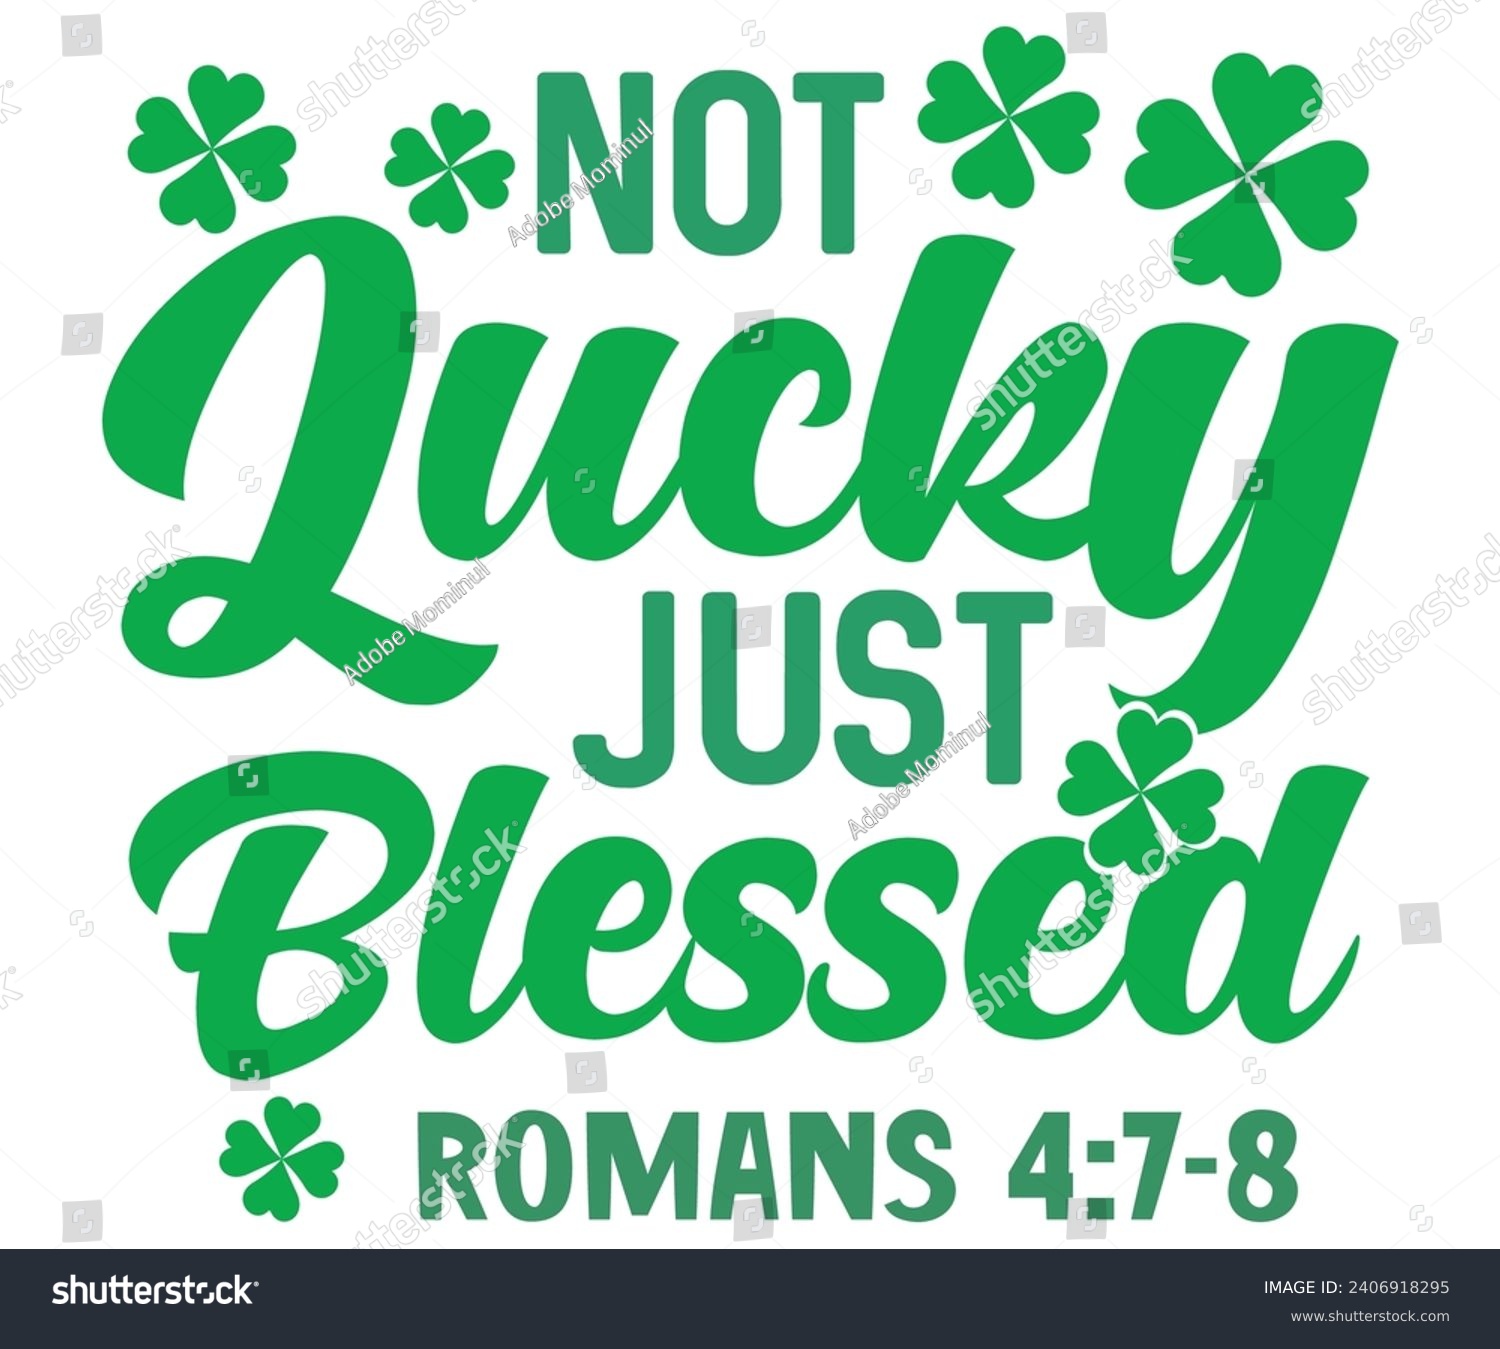 SVG of Not lucky just blessed Svg,Png,Happy St Patrick Day Svg,Patricks Day Saying,Shamrock Svg,Clover Svg,Lucky,Pinches Svg,Irish Svg,Funny St Patrick's,Instant Download,T shirt,Svg Cut File,Cricut svg